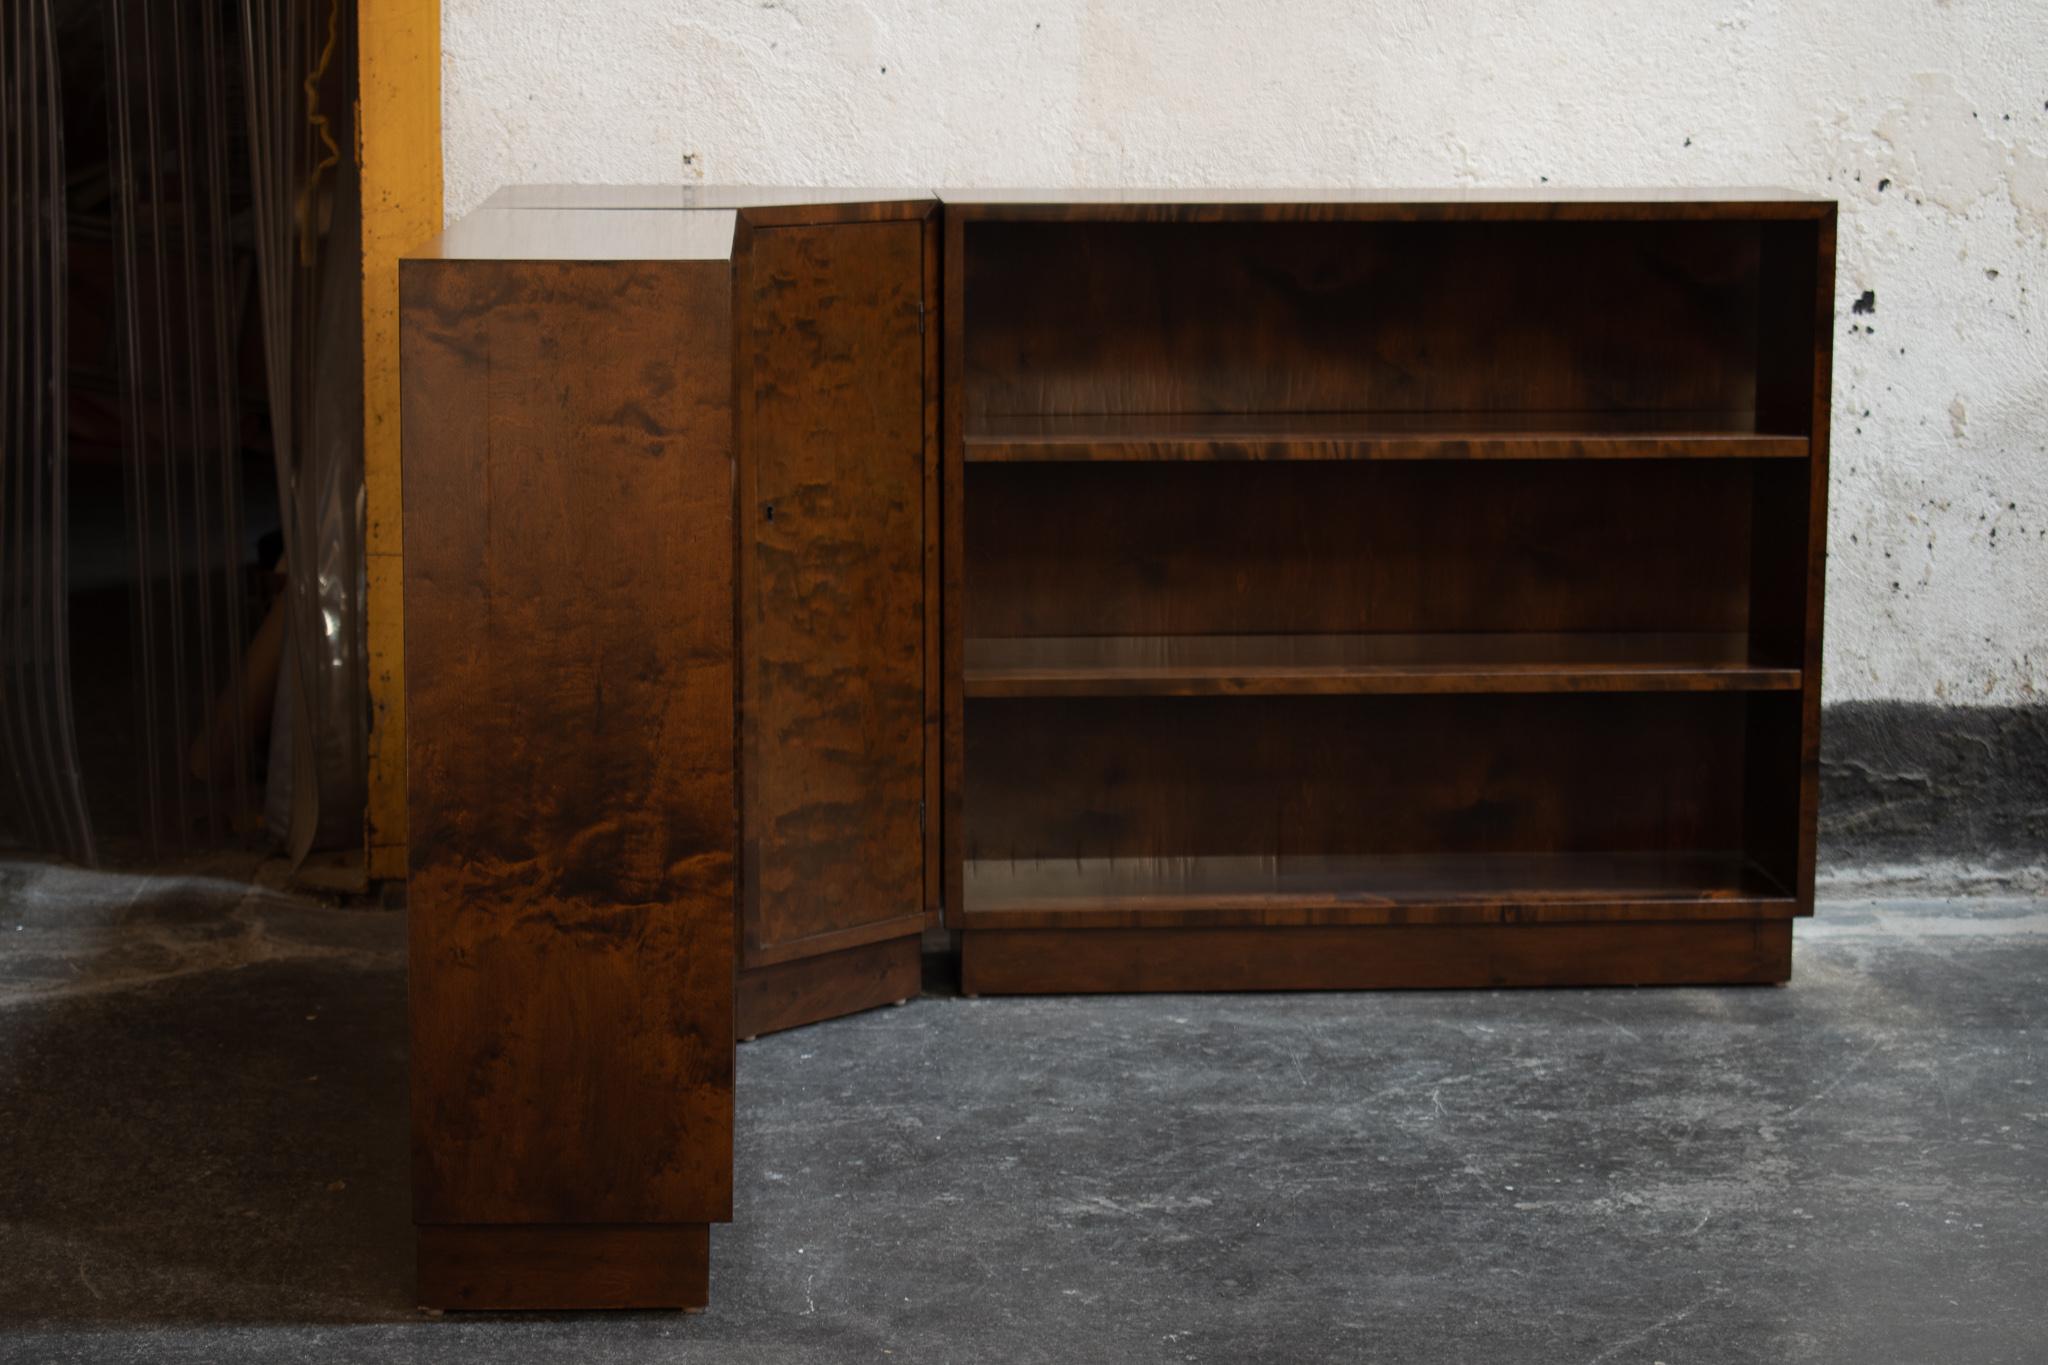 Set of Art Deco bookcases and corner cabinet in beautiful flame birch. These are three separate pieces, and the bookshelves are identical in size. They each have two adjustable shelves and are finished on the sides. The corner cupboard has two